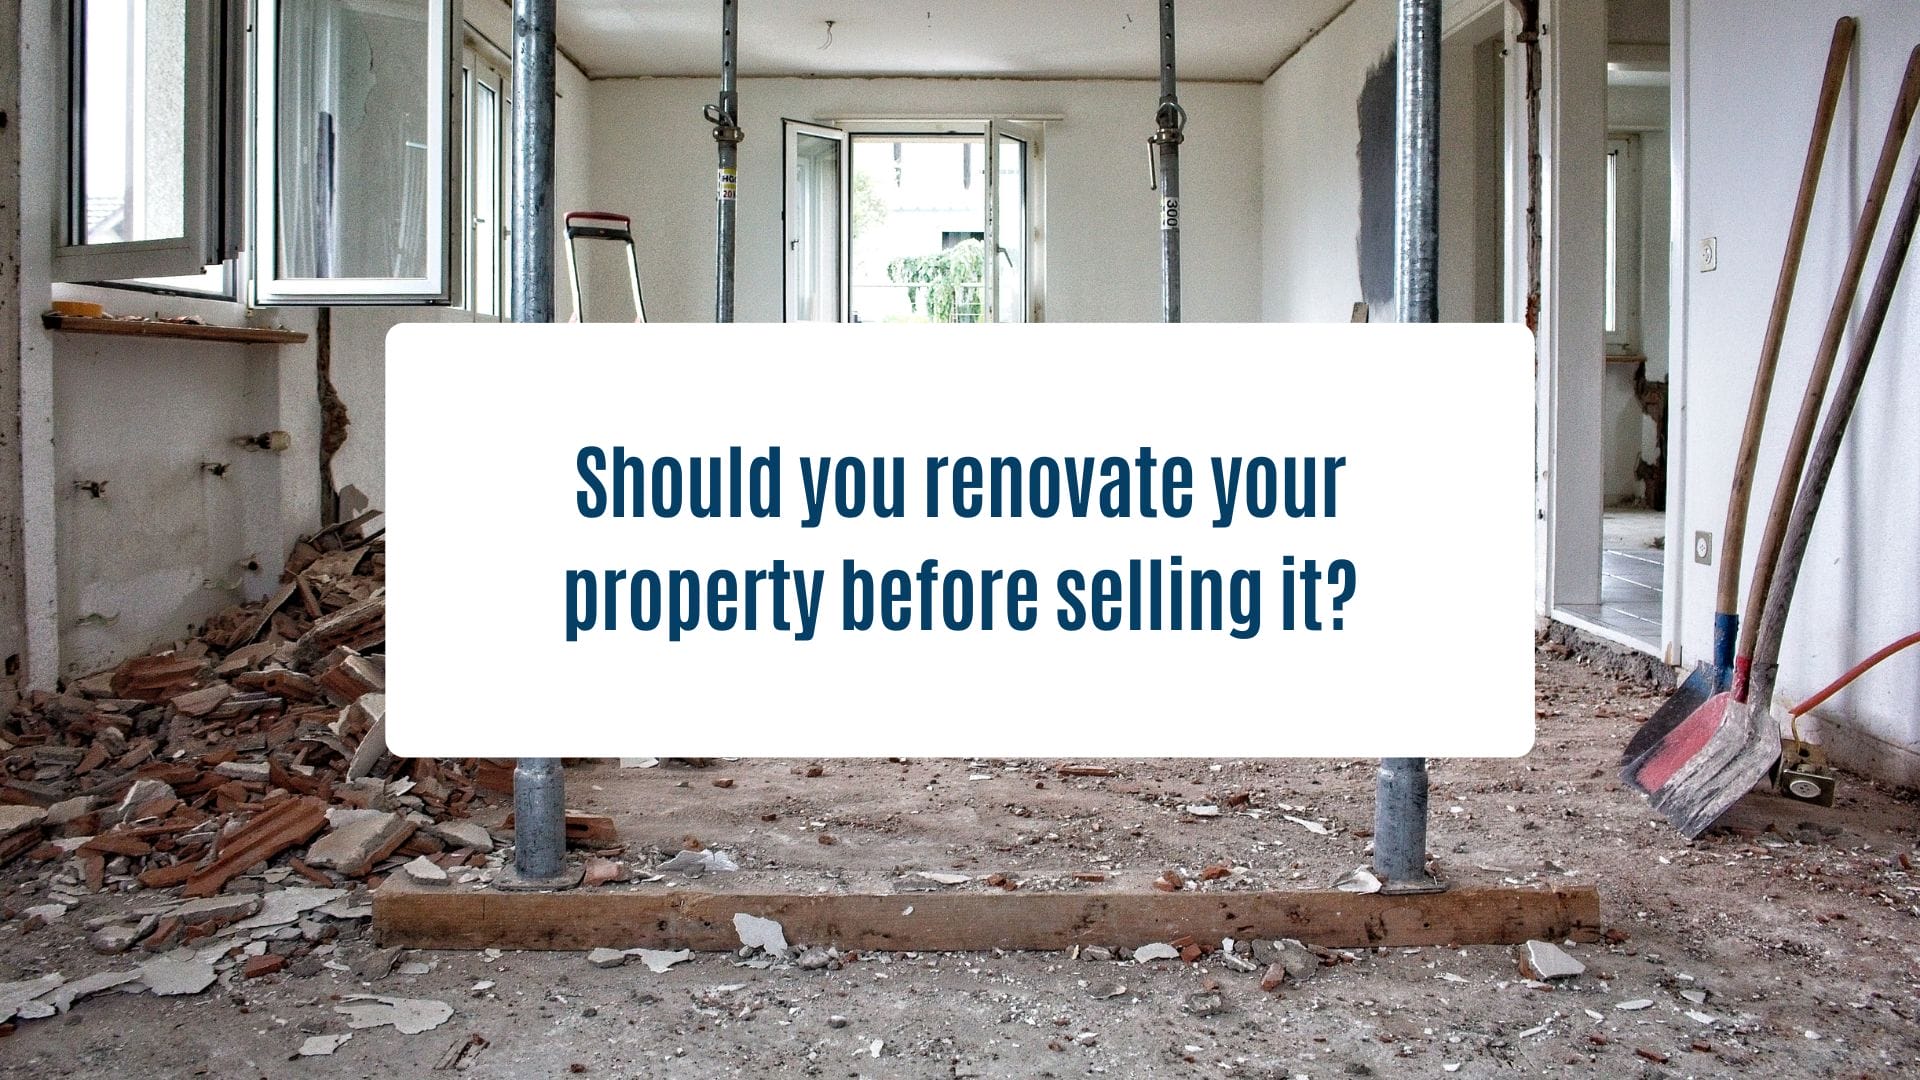 News Olam Properties - Should you renovate your property before selling it?